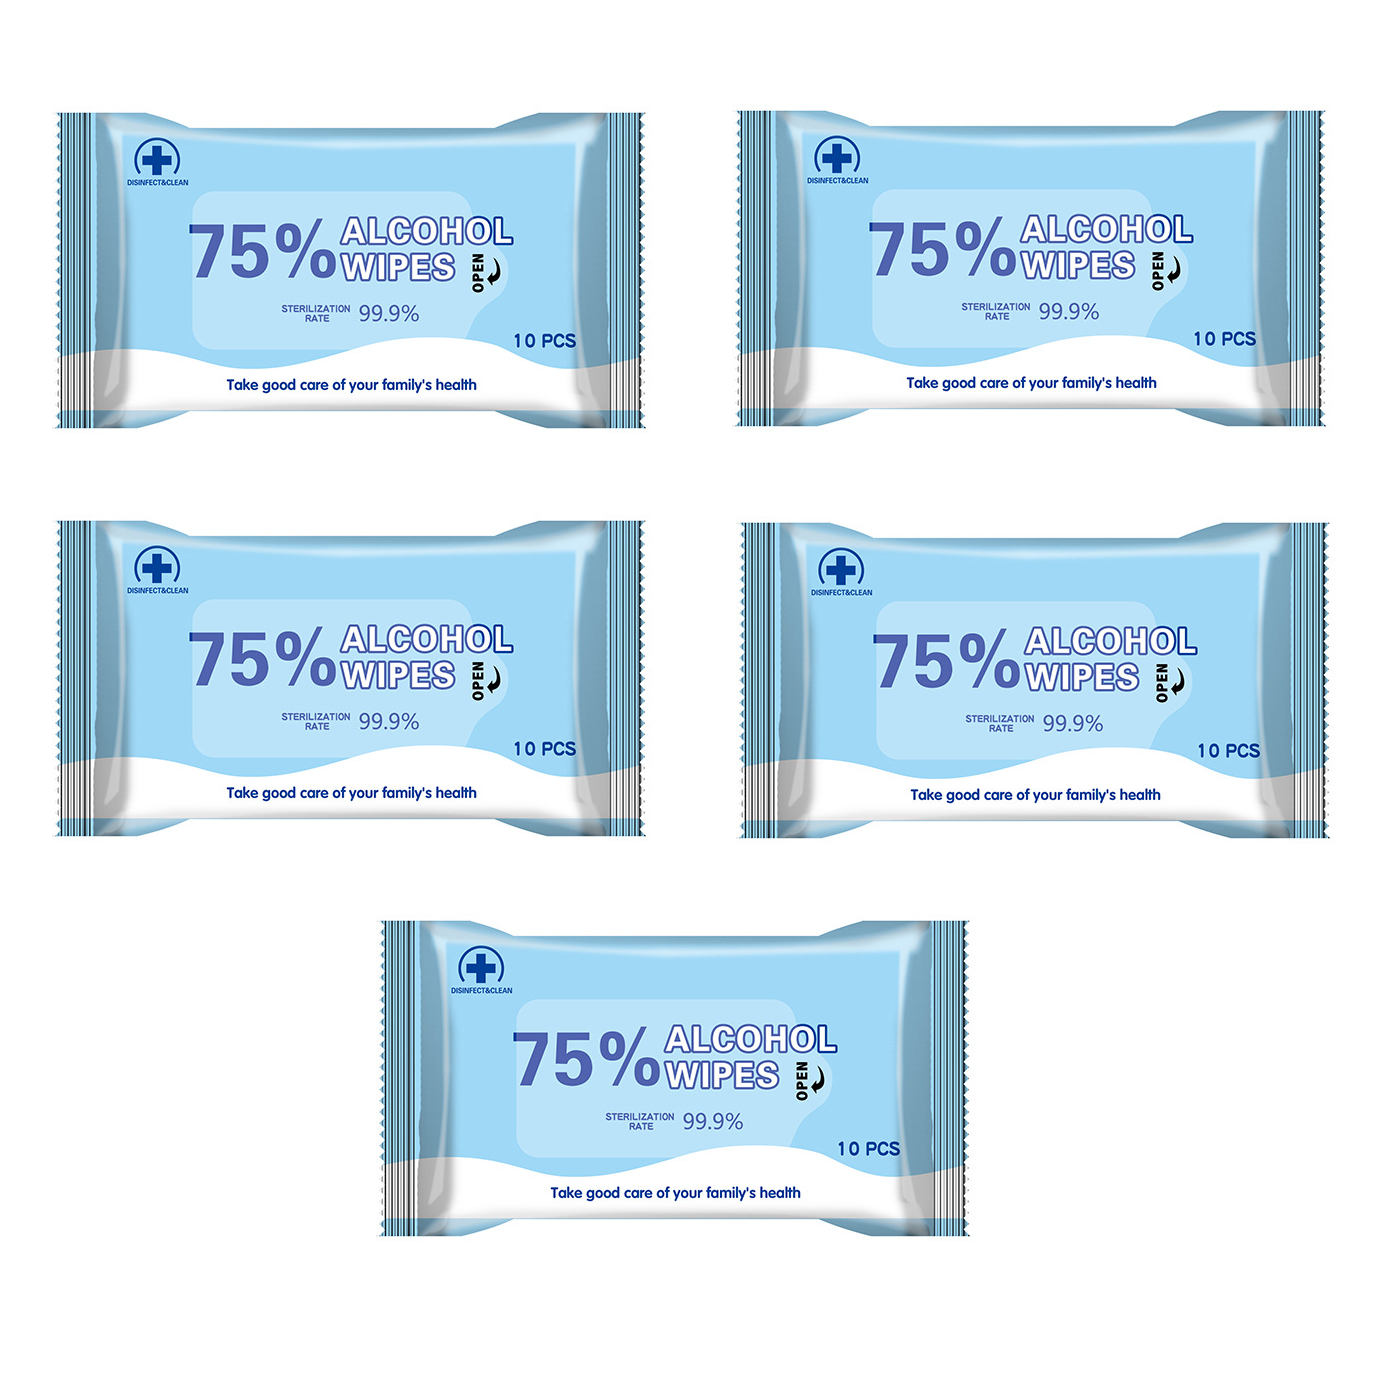 

XINQING 5 Packs Of 10Pcs 75% Medical Alcohol Wipes 99.9% Antibacterial Disinfection Cleaning Wet Wipes Disposable Wipes